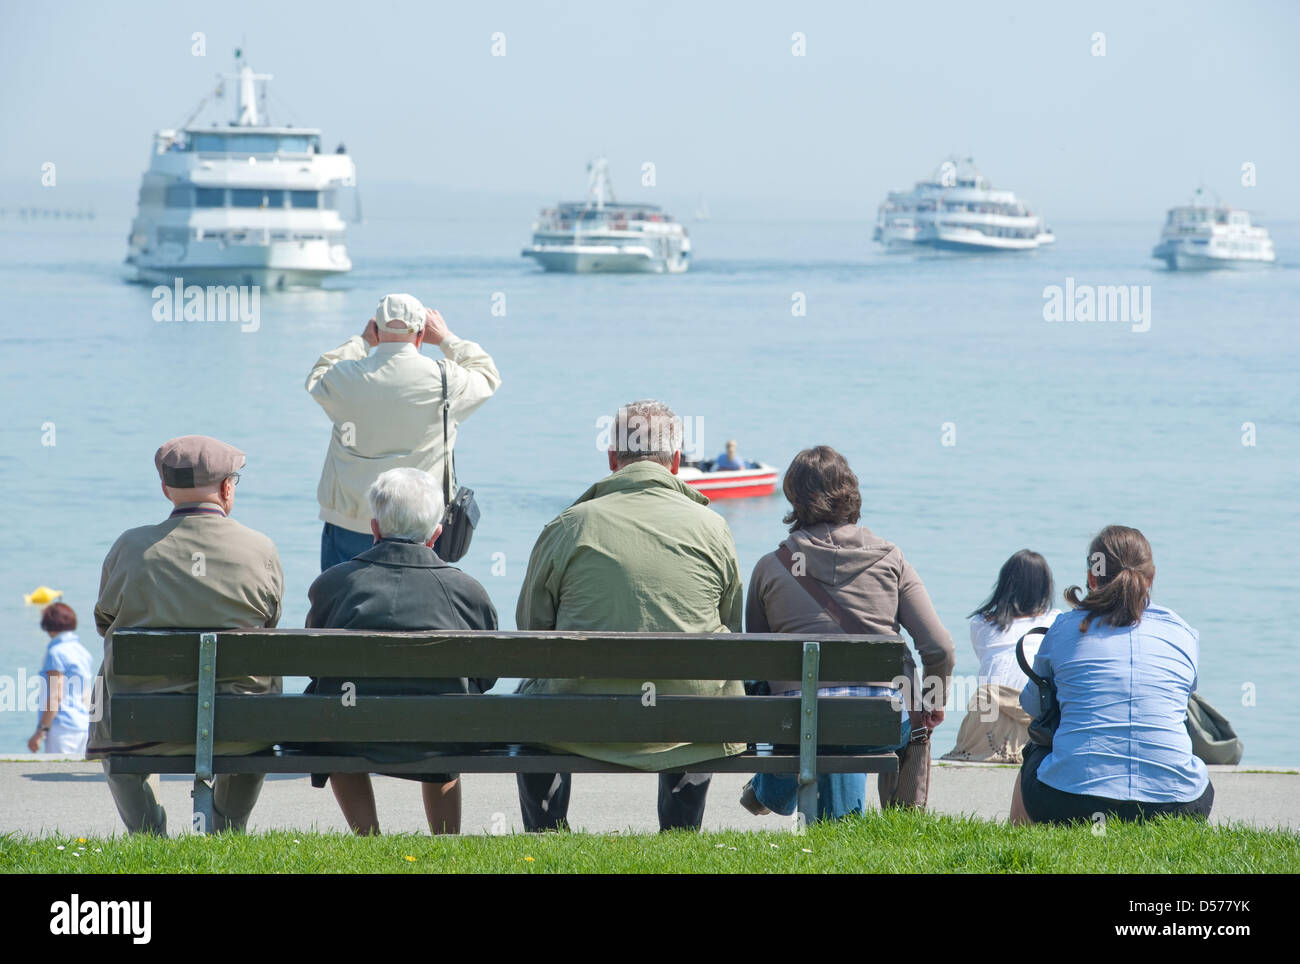 Tourists gaze at Swiss, Austrian and German ships forming a star on Lake Constance near Konstanz, Germany, 24 April 2010. The traditional 'Sternfahrt' ('star cruise') of the 'White Fleet' is the start of season on Lake Constance. It is one of the main attractions in the border triangle. In 2009, 3.9 million passengers cruised over Lake Constance with excursion-boats and ferries. Ph Stock Photo